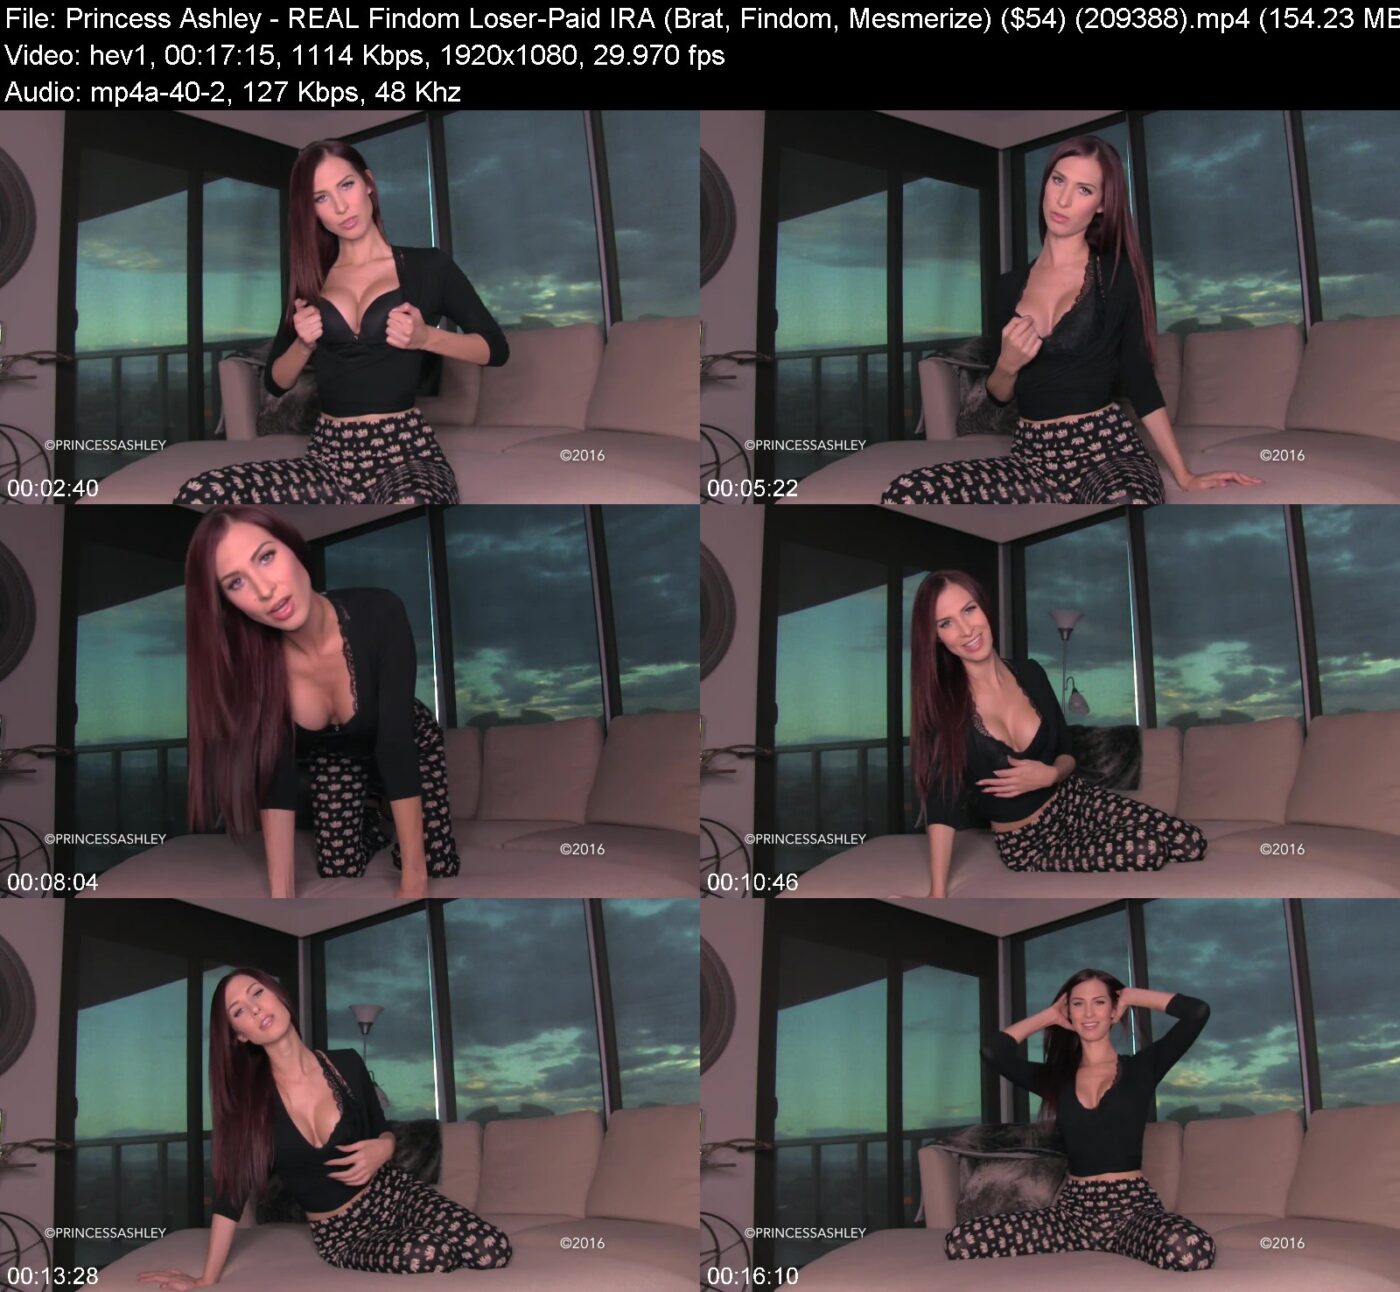 Princess Ashley in REAL Findom Loser-Paid IRA (Brat, Findom, Mesmerize) ($54) (209388)